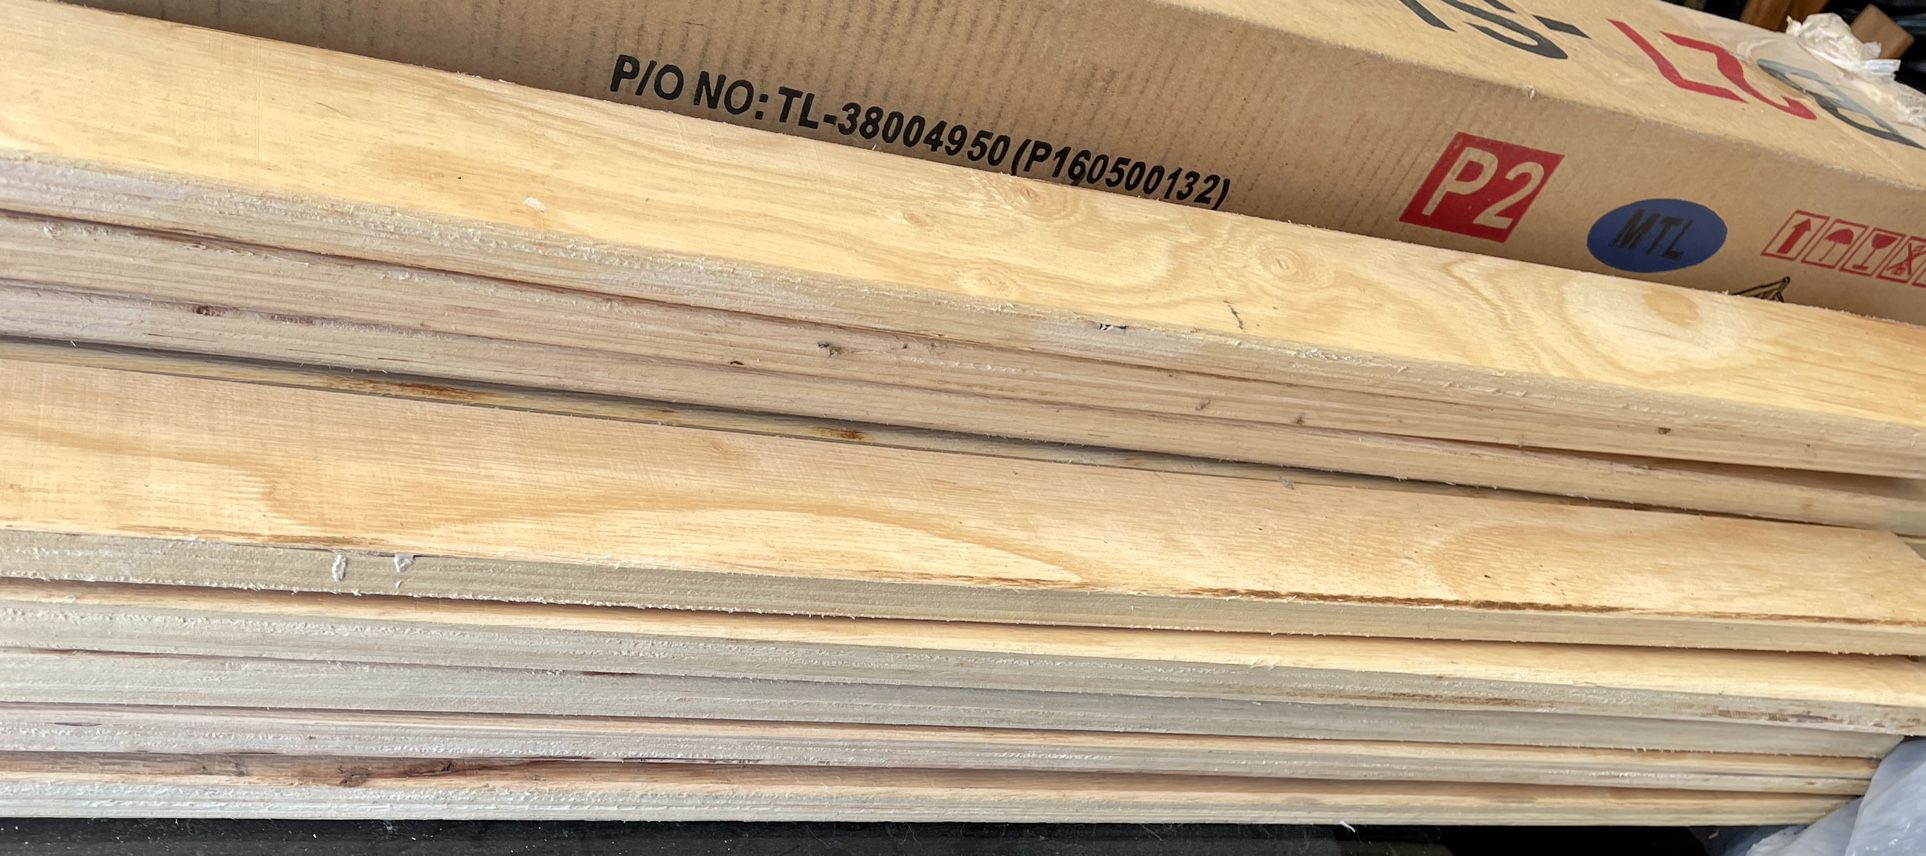 *BUNKIE BOARD REPLACEMENT*   (2x)  Todd Collection 13-pc Bunk Board Slats - B27-SL(MTL) - 26 Pieces Total - 39”x2.75”x0.75” - Open Box, never used